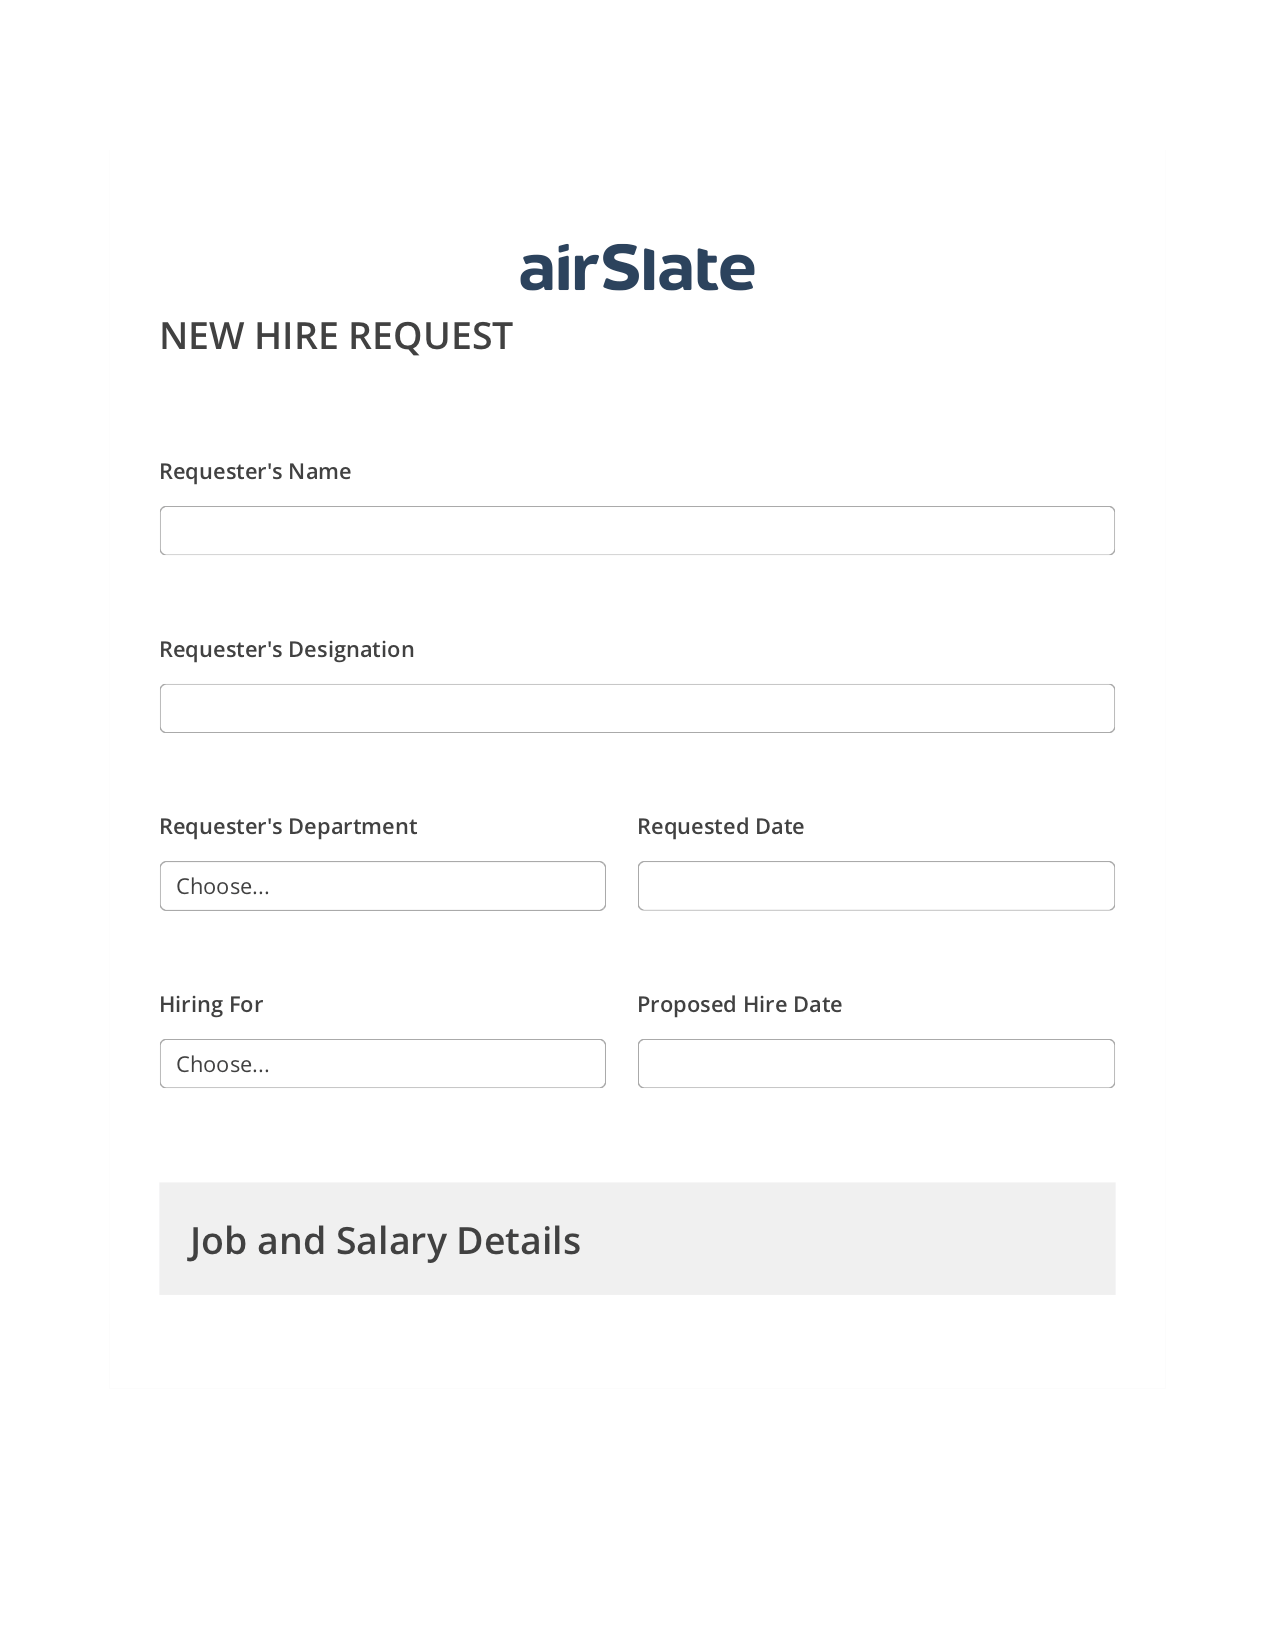 Hiring Request Workflow Pre-fill Dropdowns from CSV file Bot, Send Mailchimp Campaign Bot, Archive to Google Drive Bot